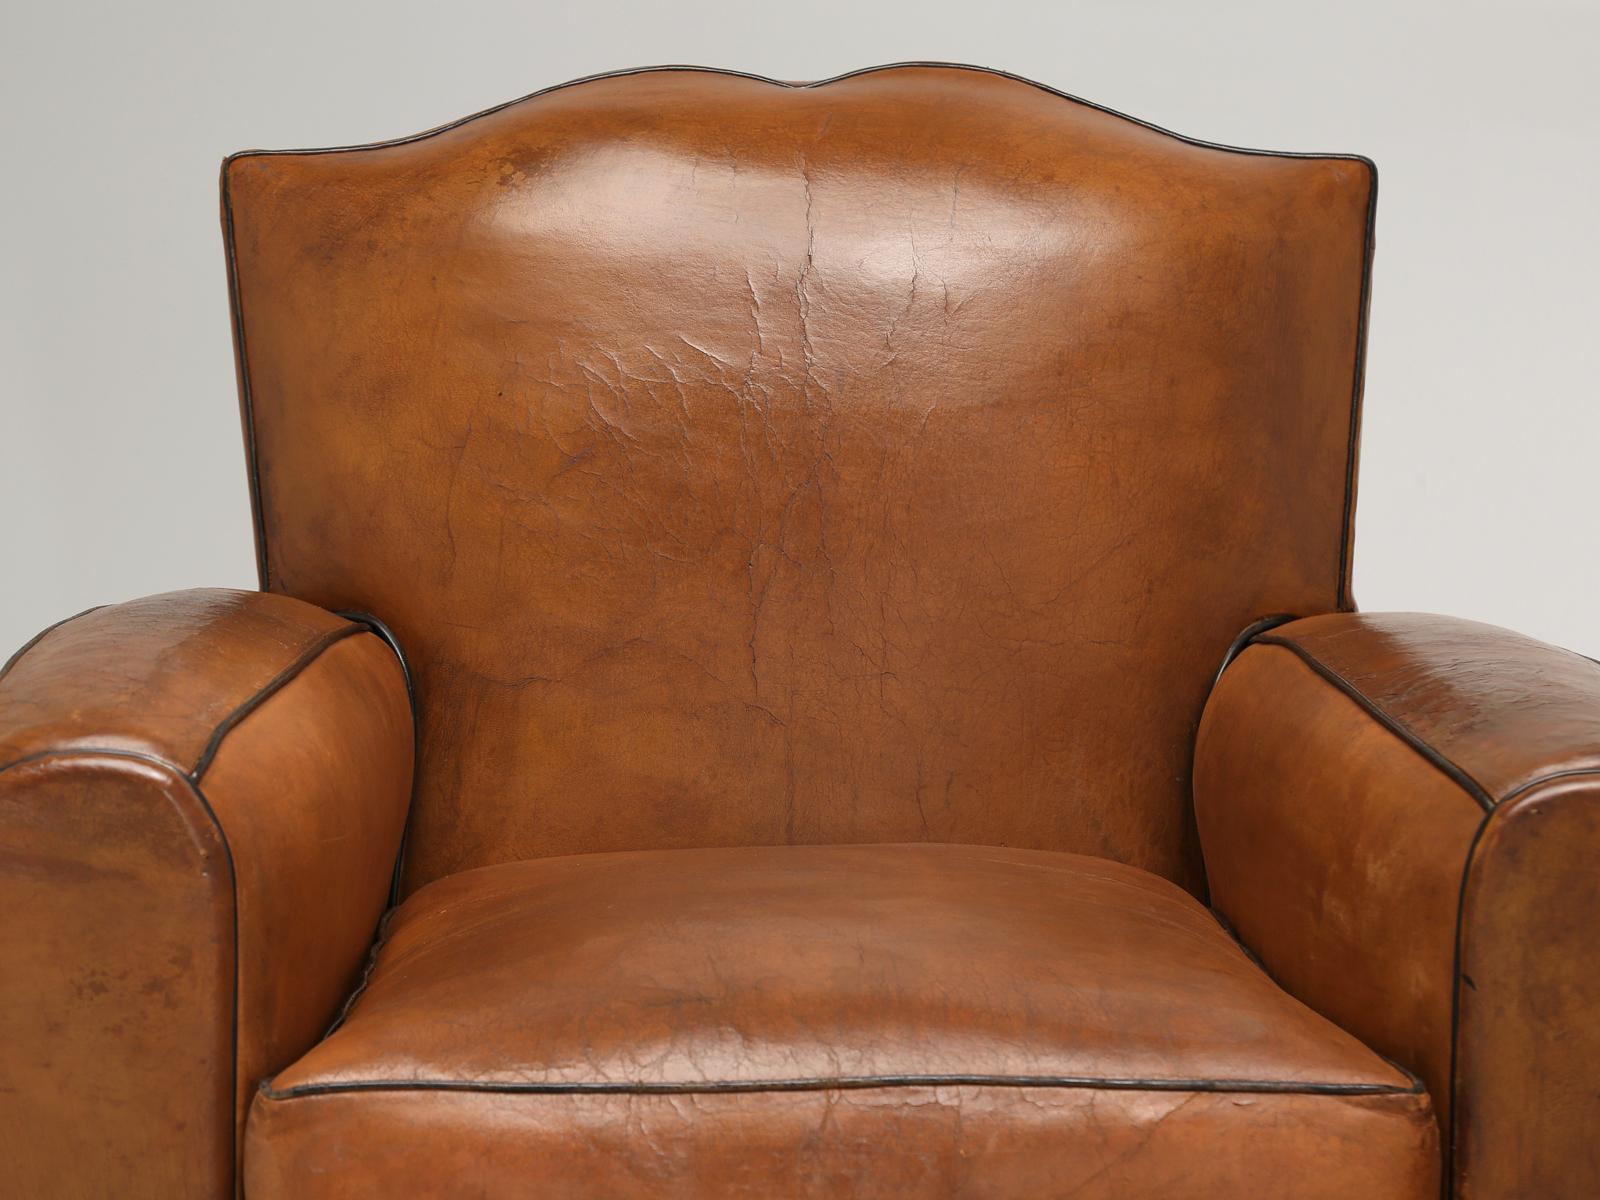 Pair of French Art Deco Moustache club chairs still maintaining their original leather covering. During our comprehensive conservation process, our inhouse Old Plank upholstery department, will adhere a heavy-duty fabric to the backside of the